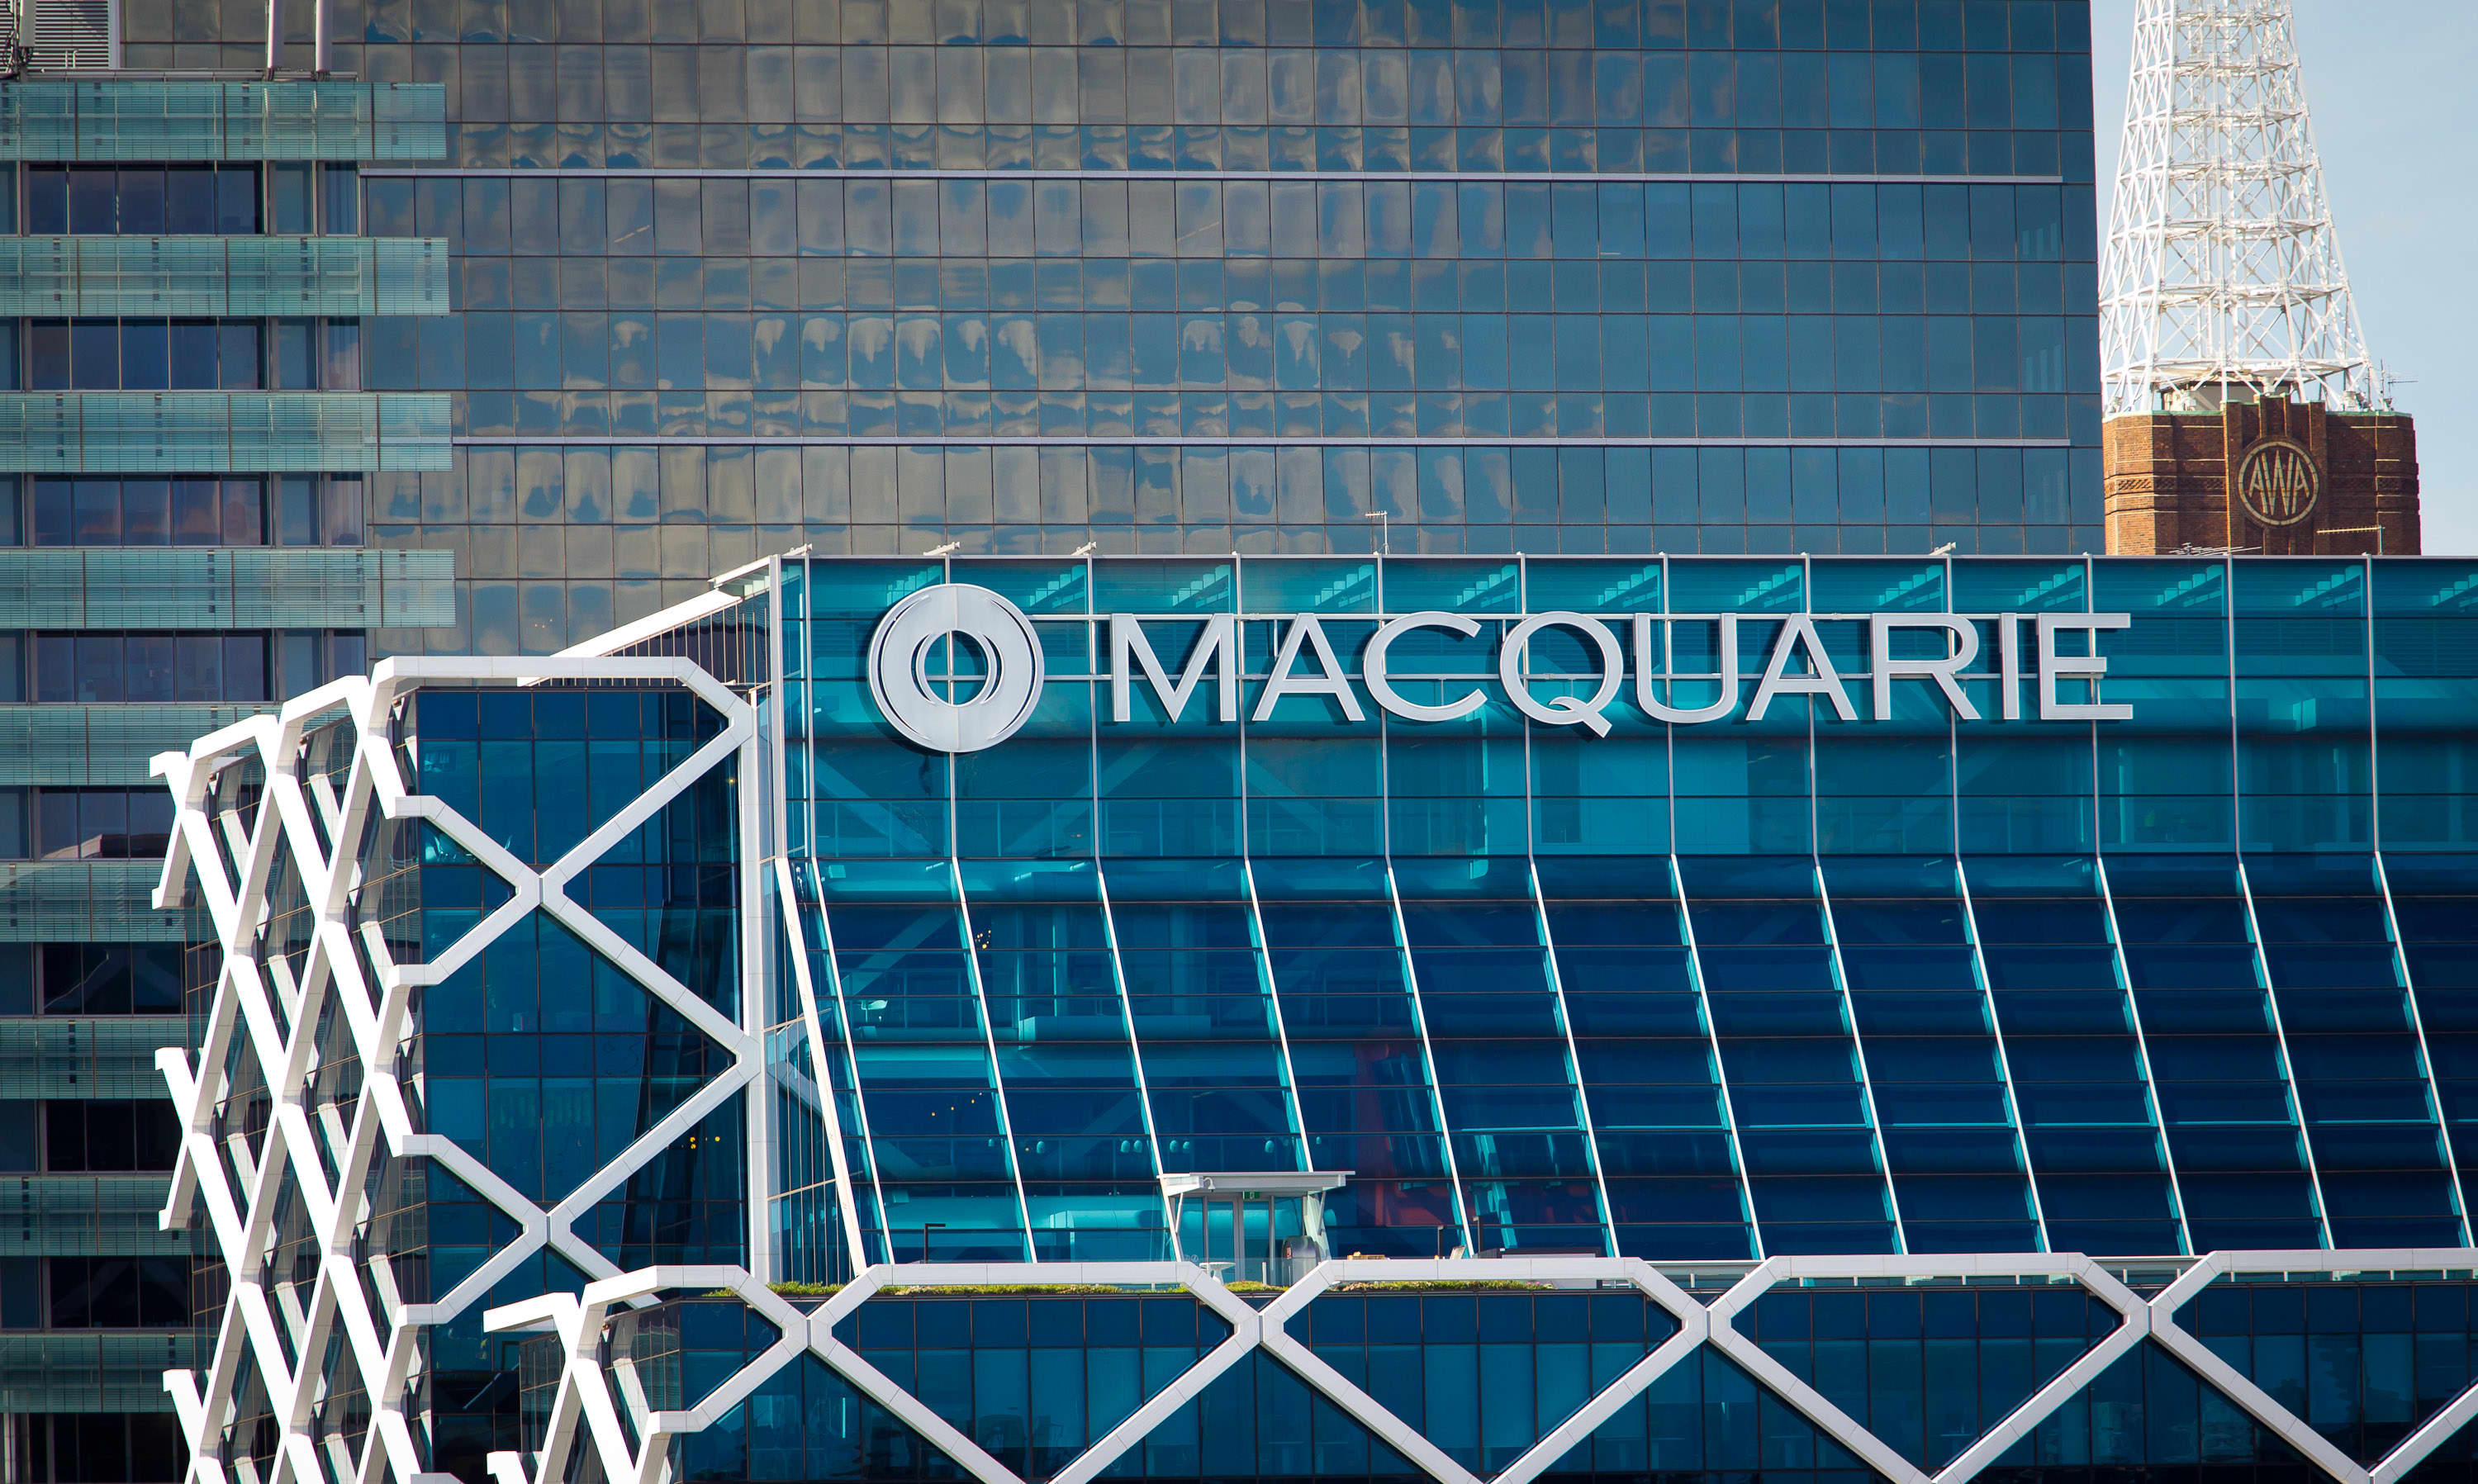 Macquarie Insights on the App Store